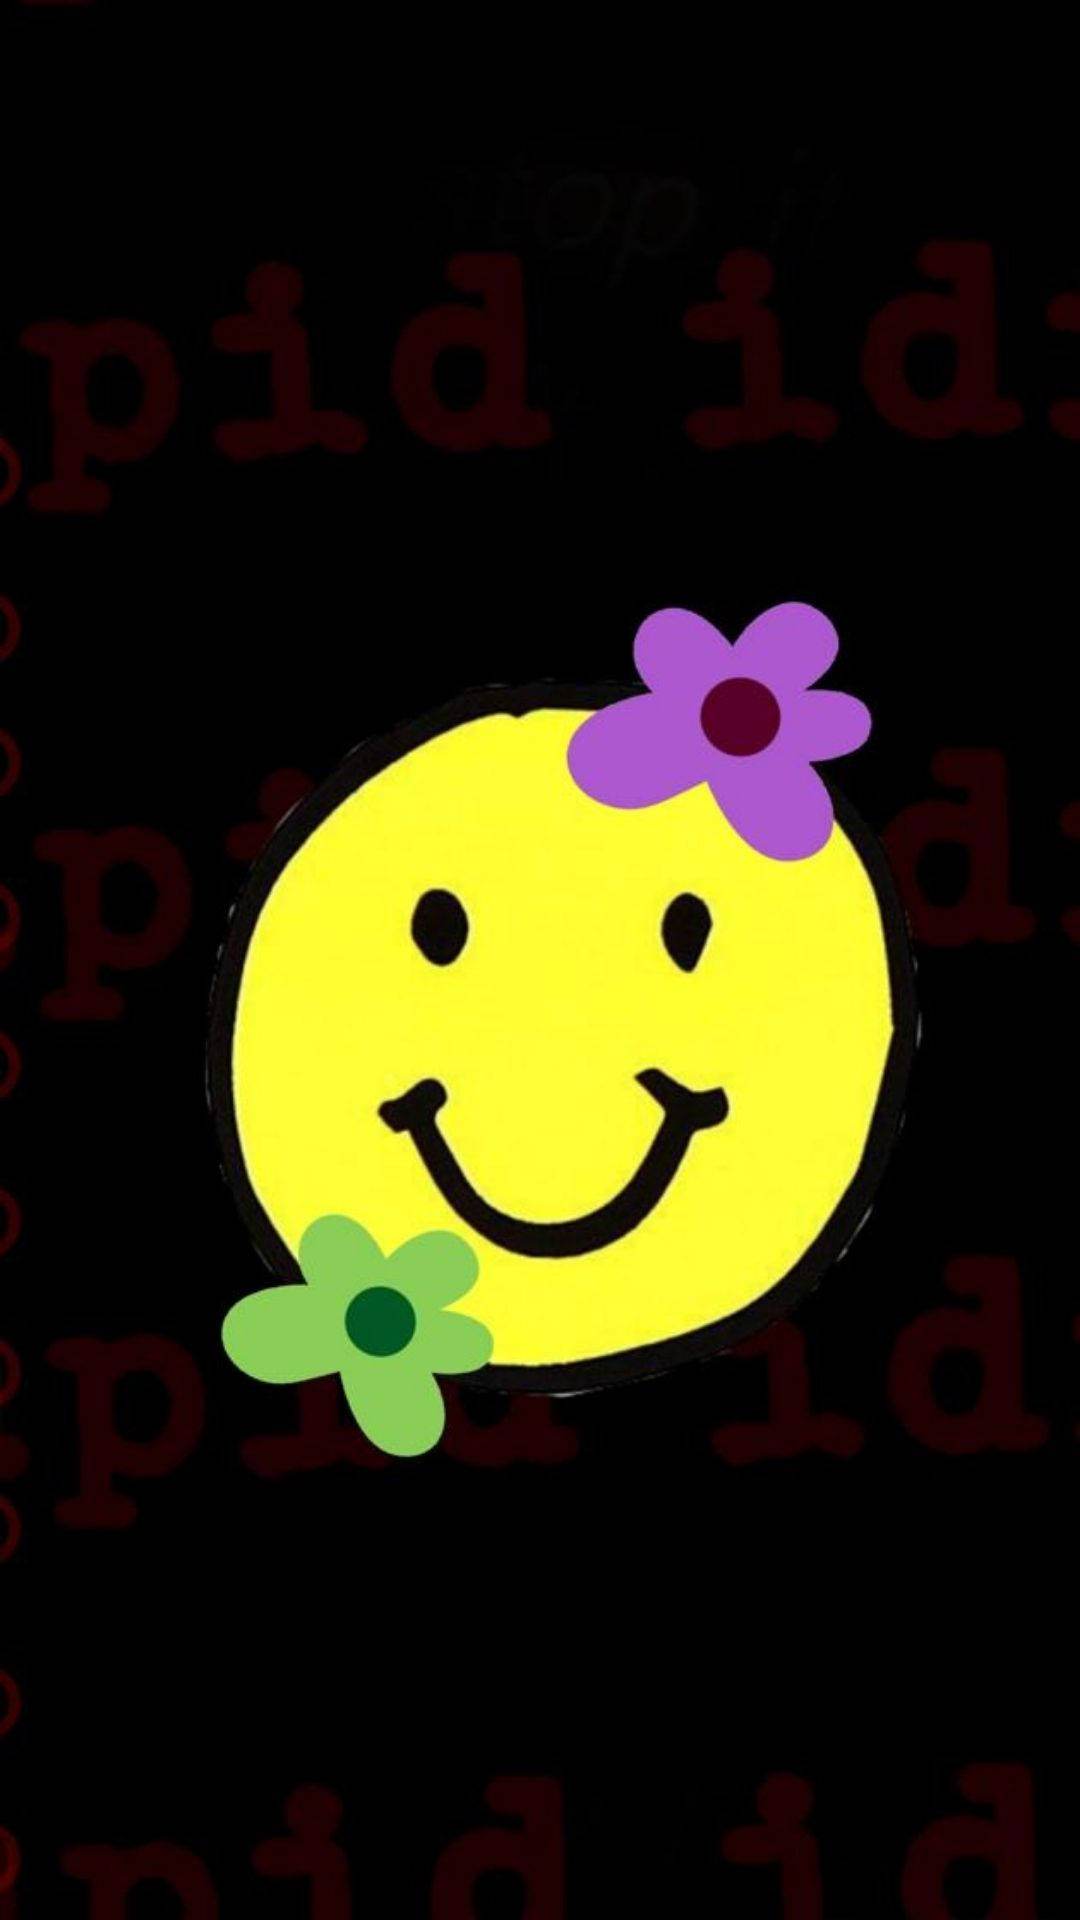 Dreamcore Emoticon With Flowers Wallpaper